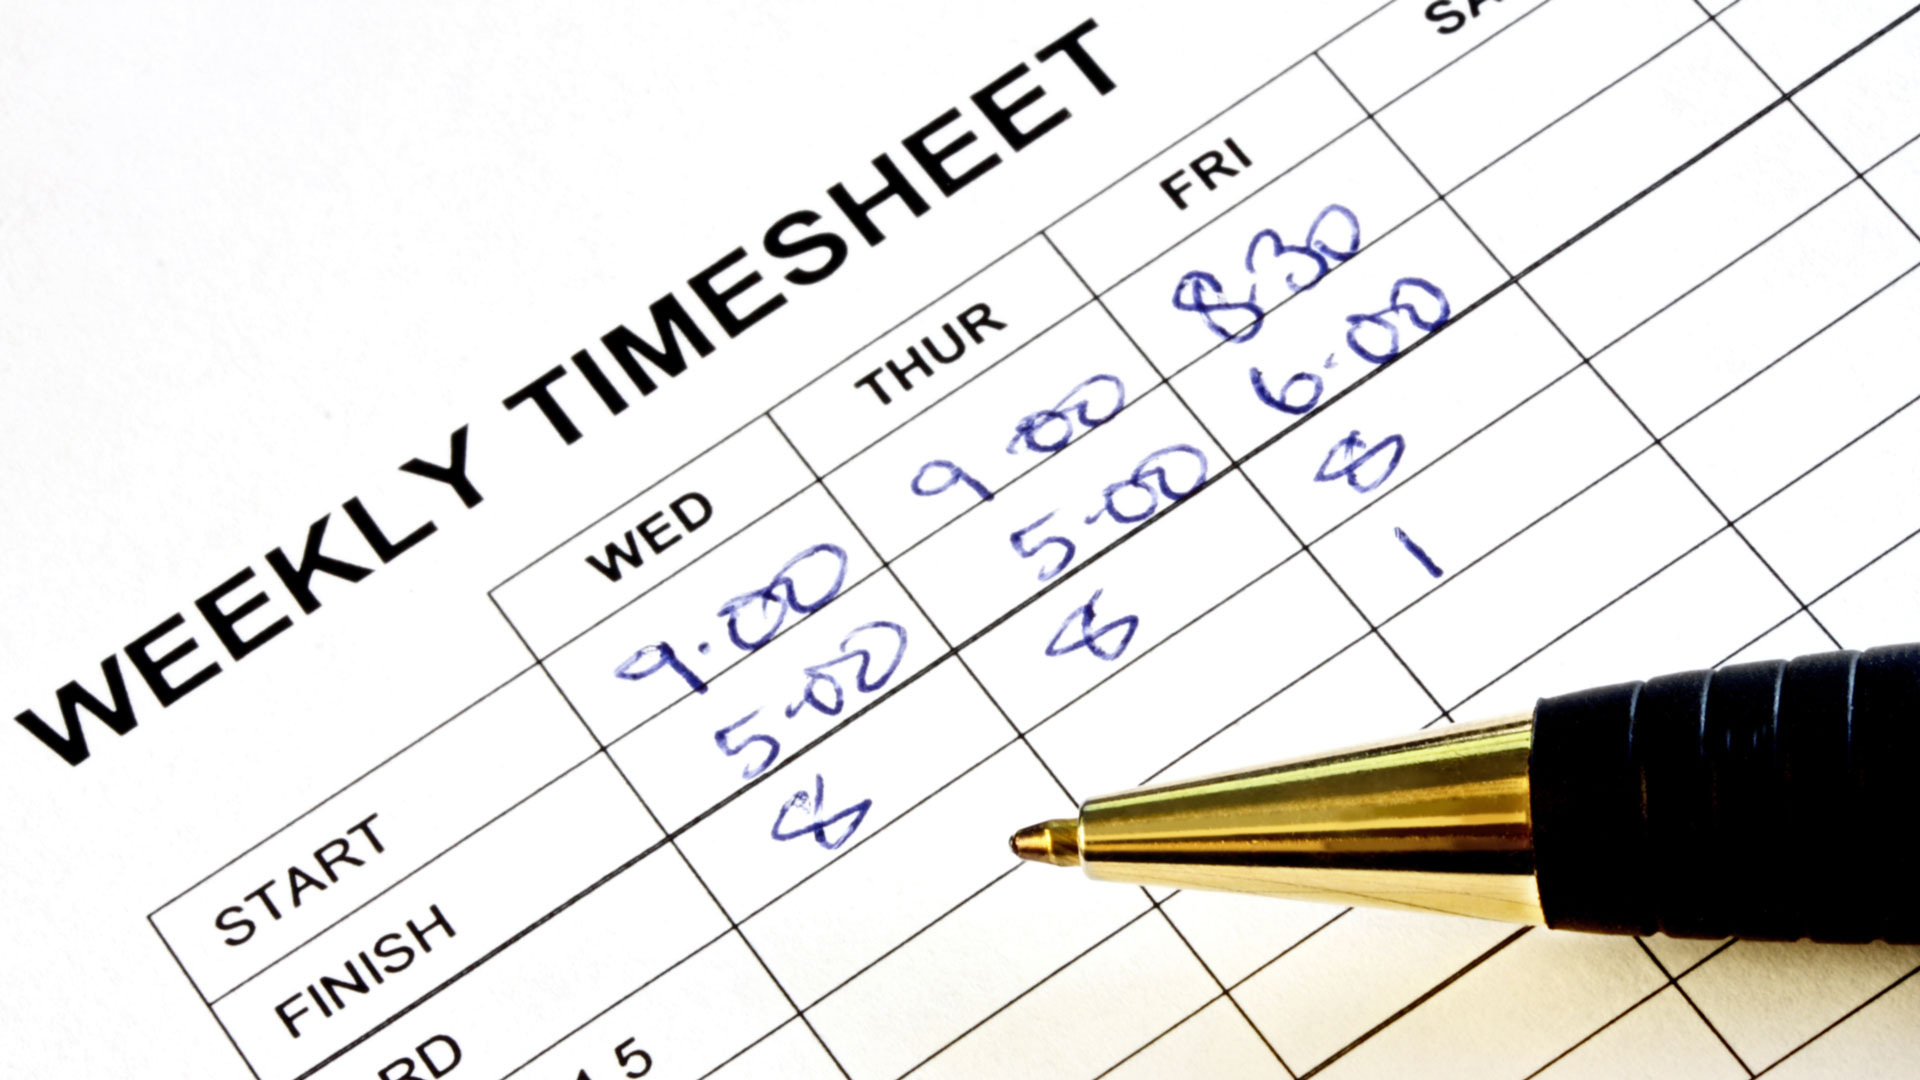 BusyBusy for employee time tracking without hindering productivity